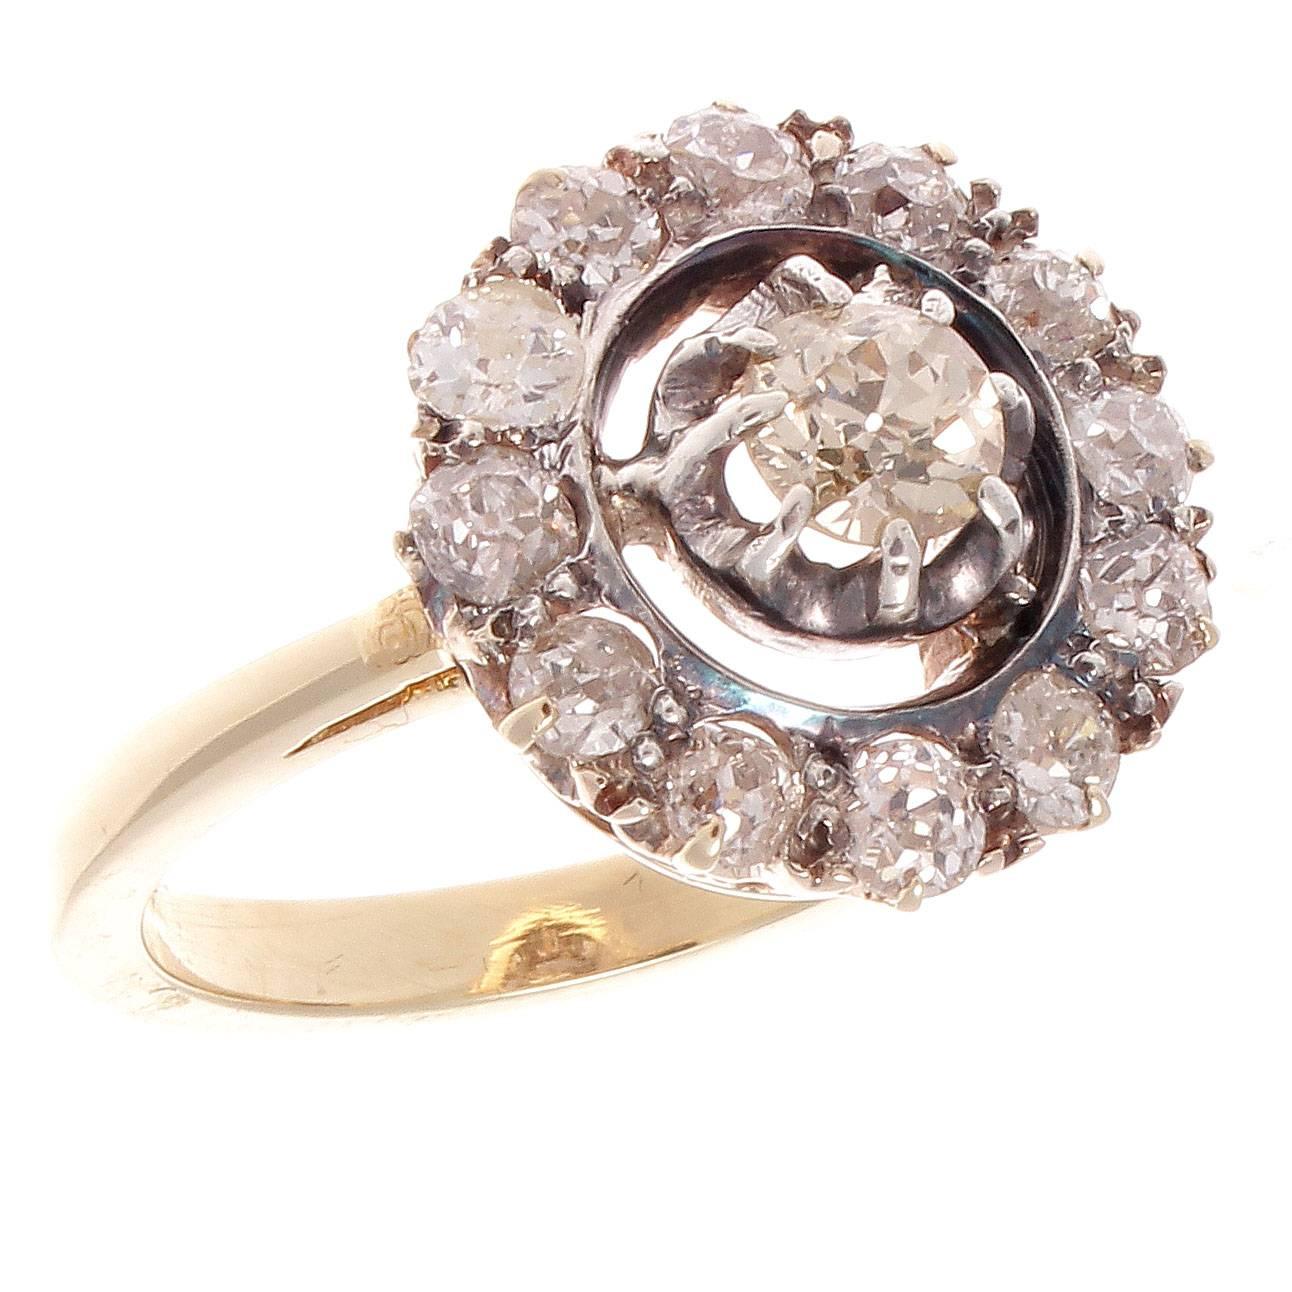 This is the original classic of a celestial design from the 19th century that is know referred to as the cluster ring. Featuring numerous old cut diamonds orbiting a single diamond. Hand crafted in 14k yellow gold and silver.

Ring size 6 1/4 and